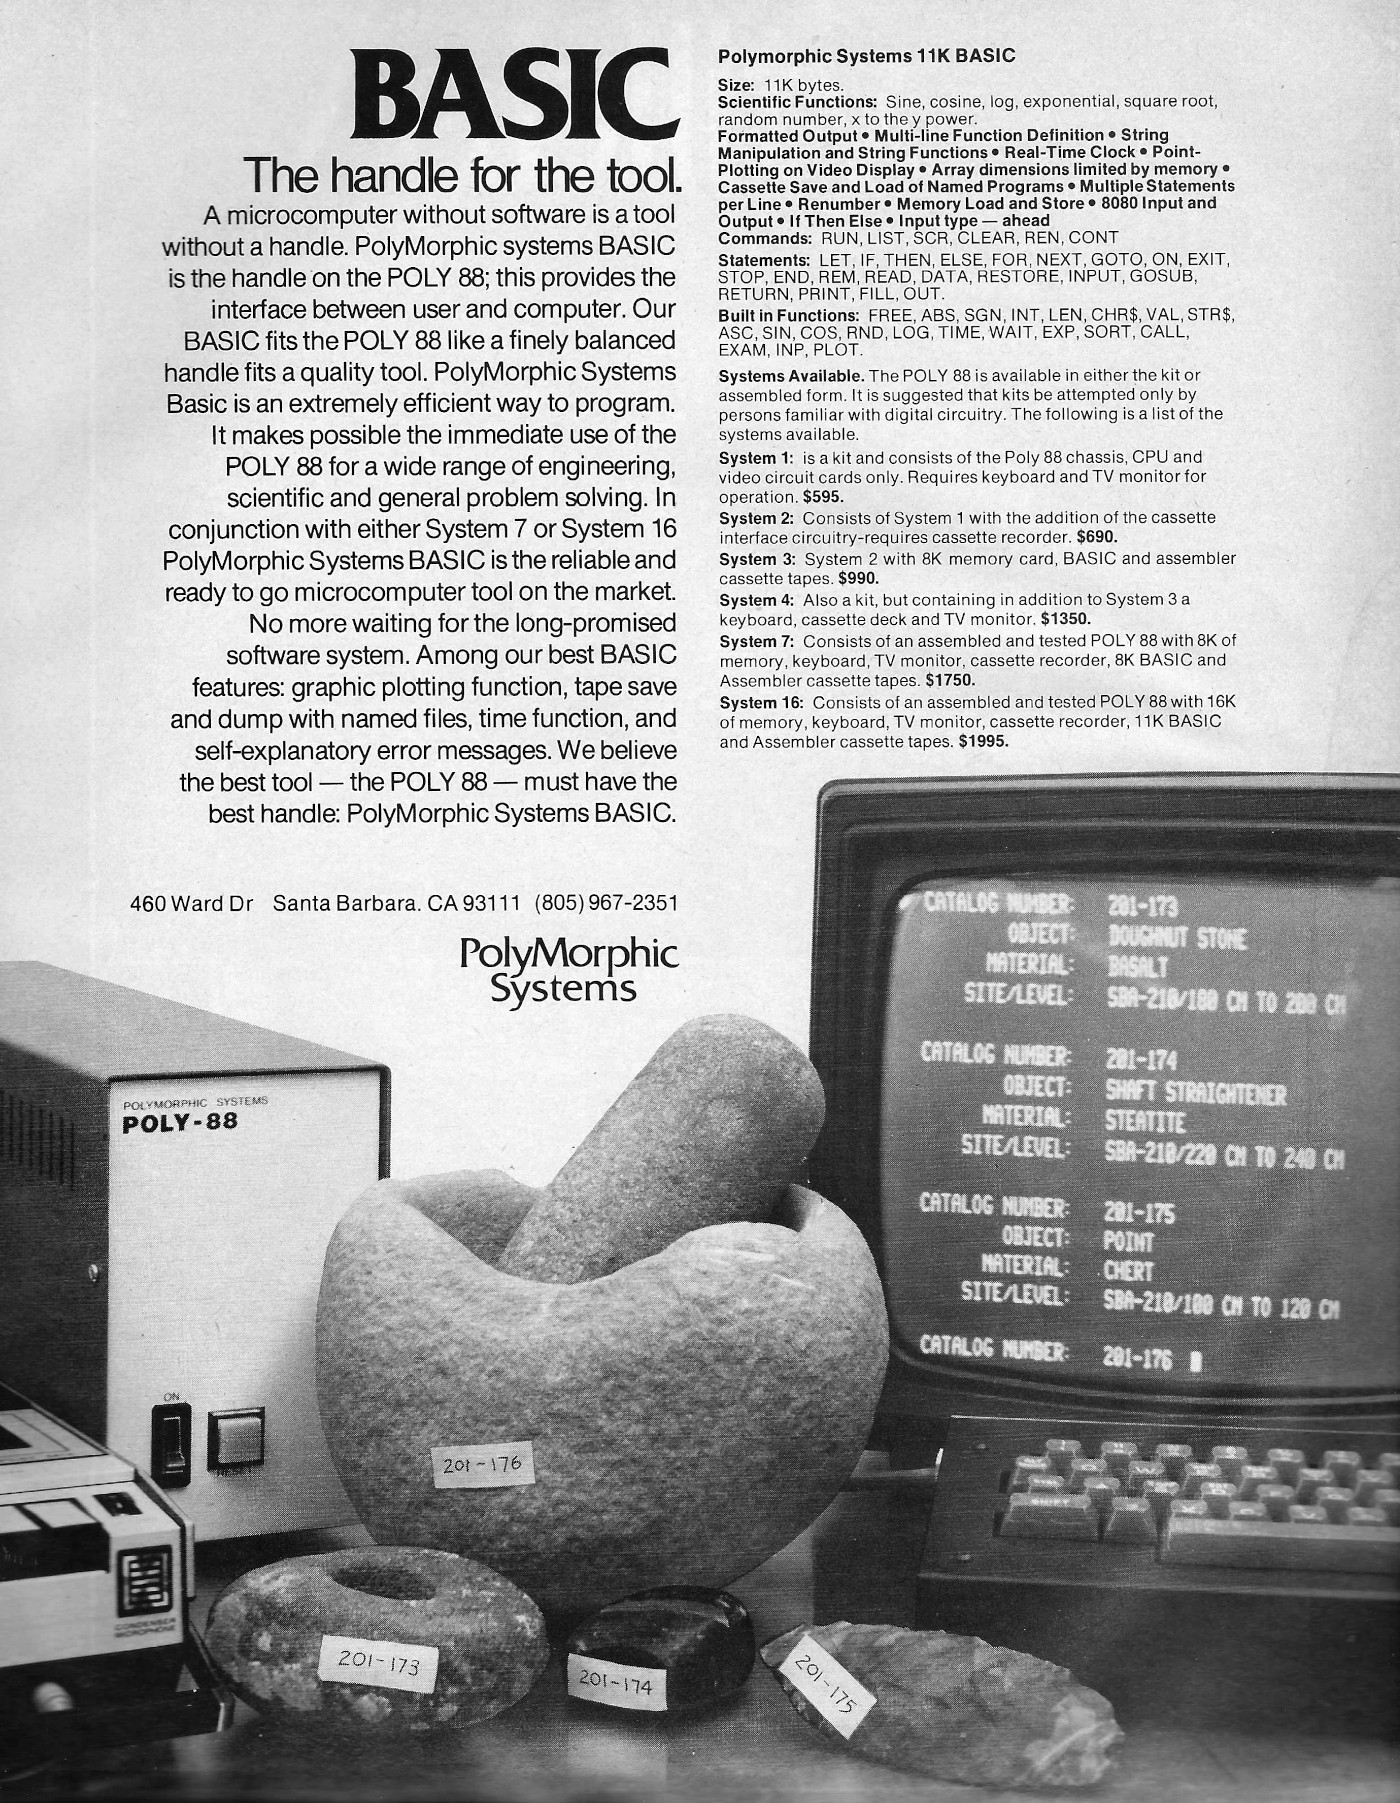 Polymorphic's BASIC - a microcomputer without software is a tool without a handle. This PolyMorphic advert also features a few more 